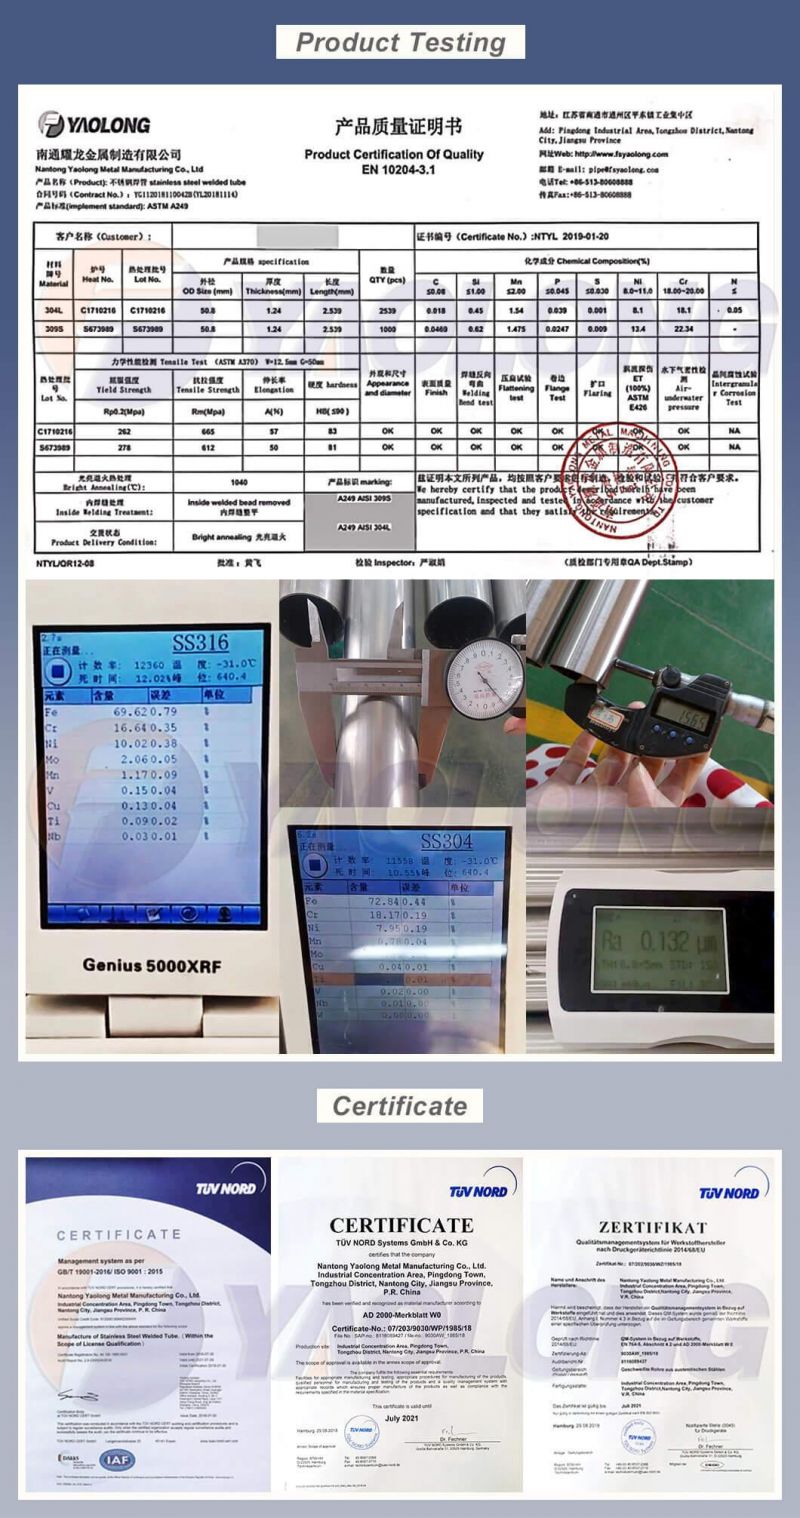 AISI 304L Stainless Steel Welded Dairy Pipeline with Spectrum Analysis